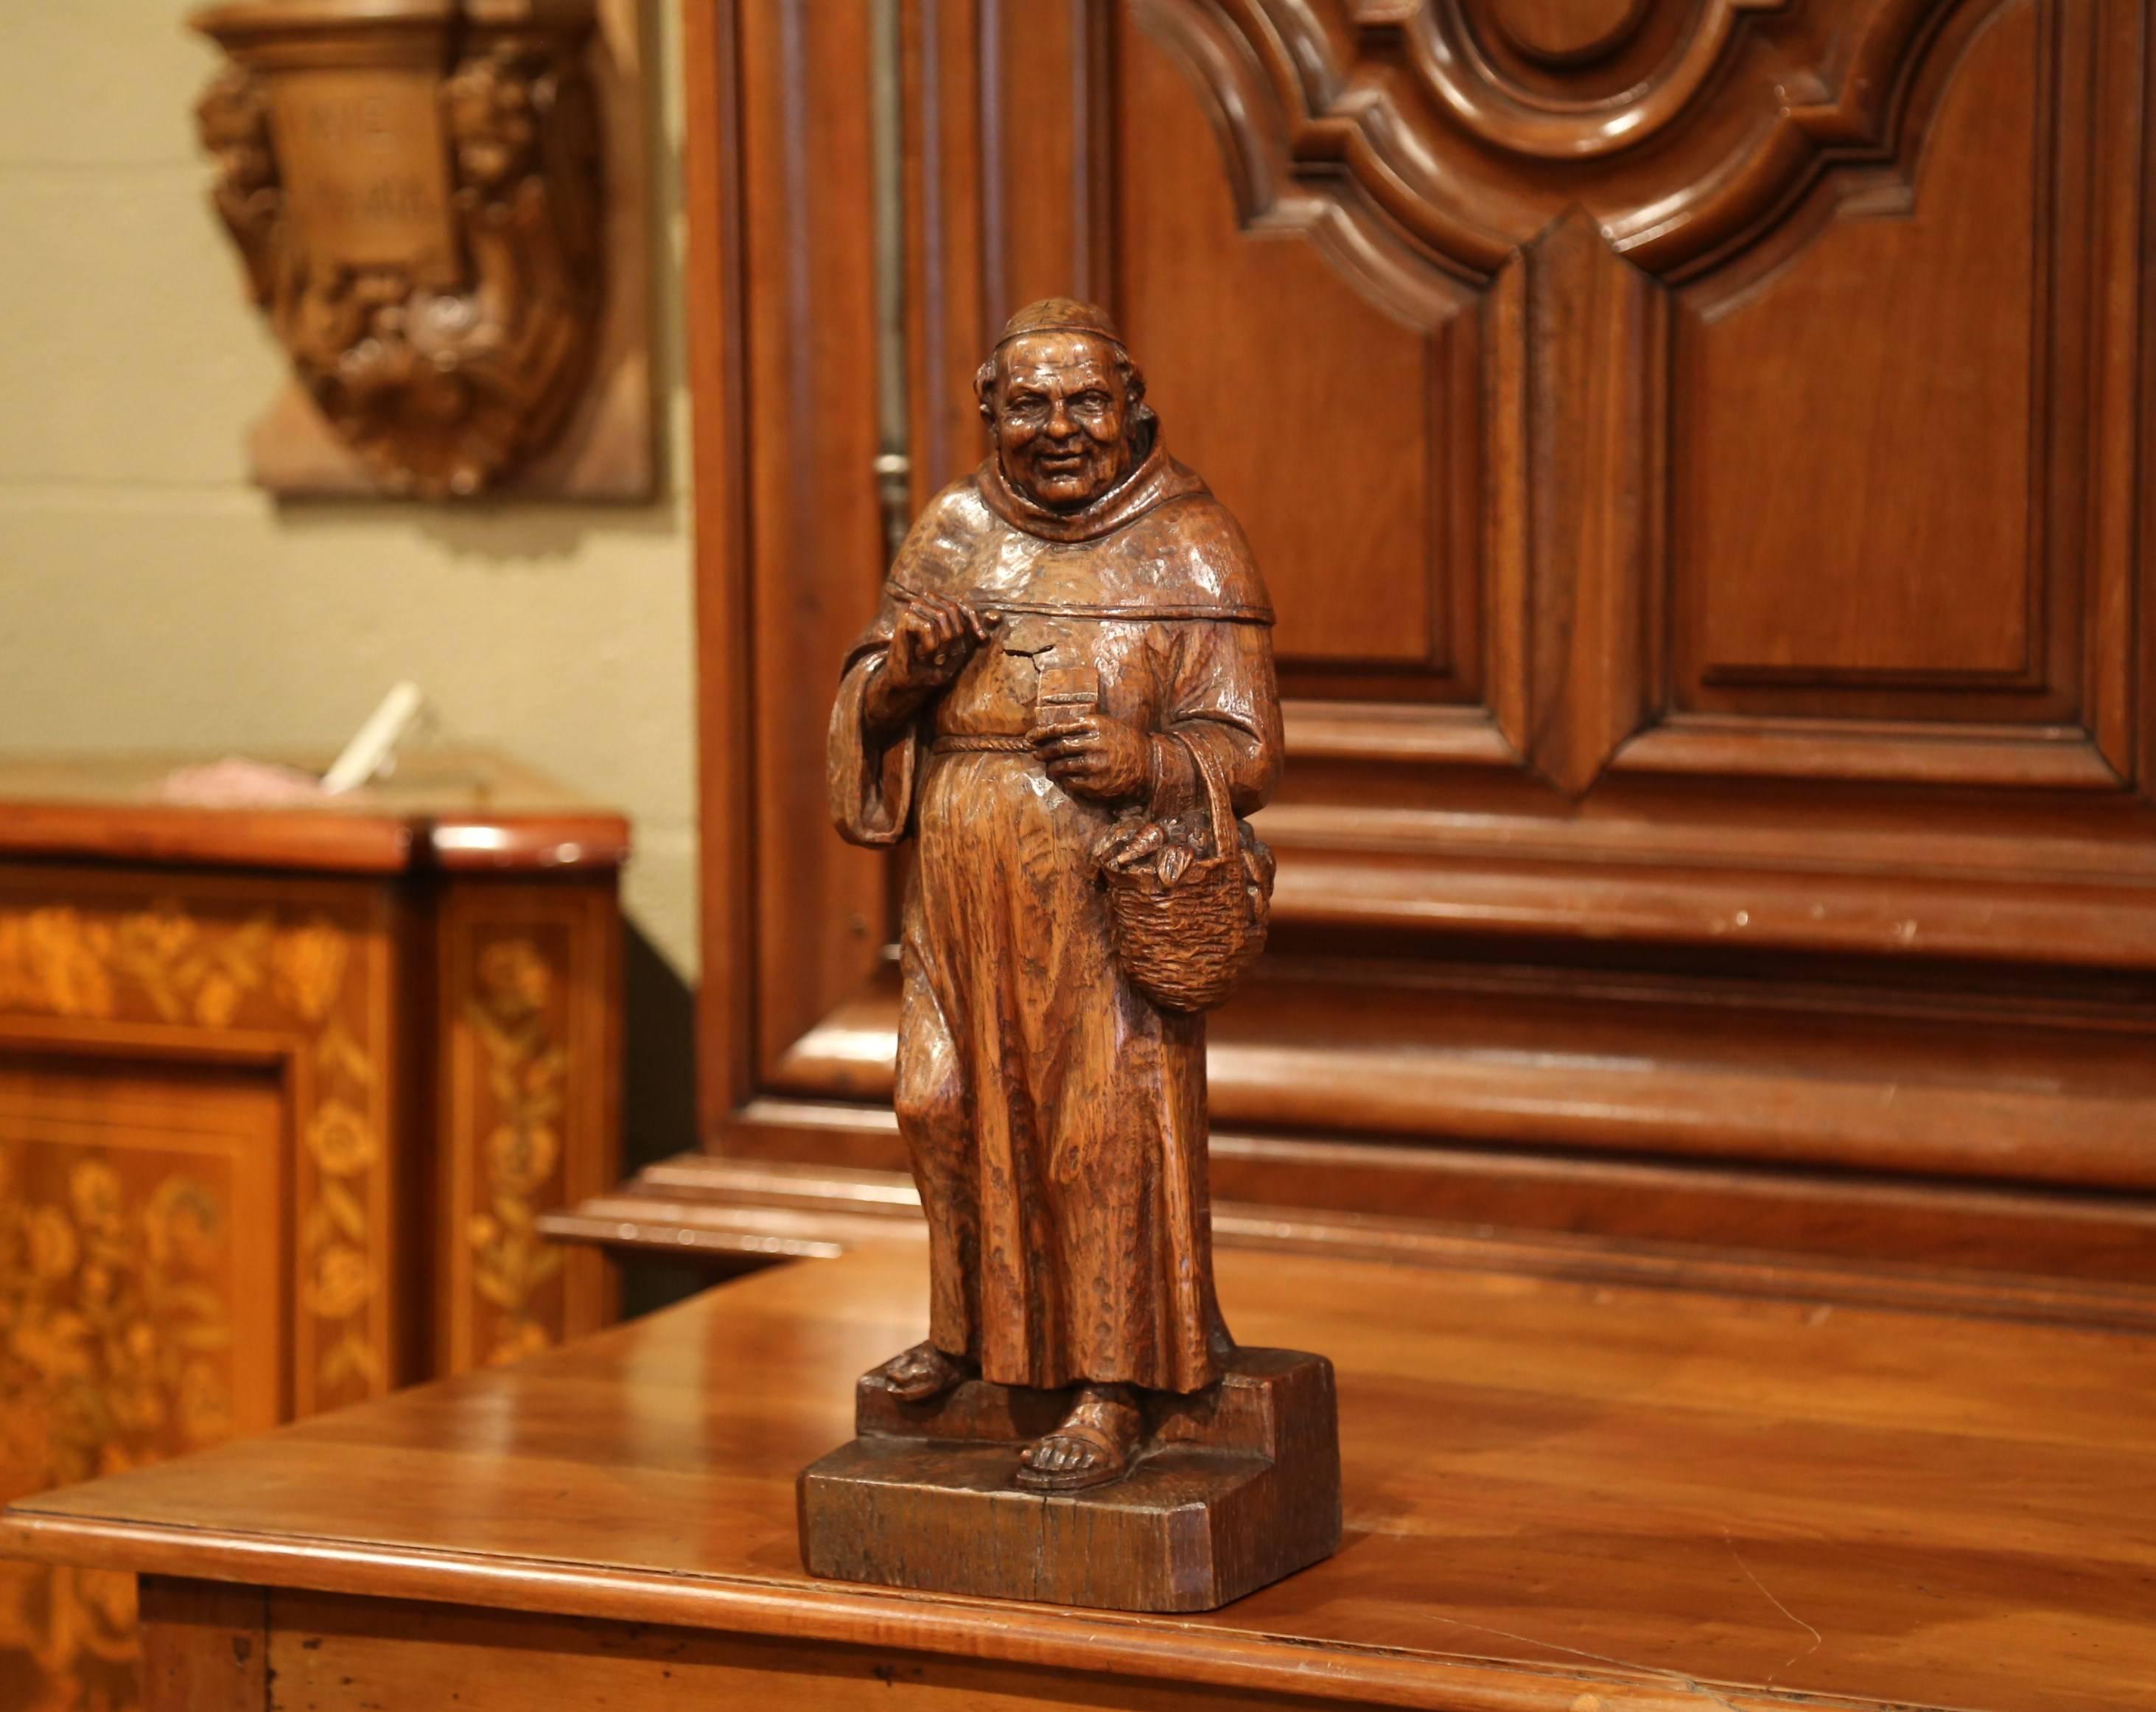 Decorate an office or a bar with this exquisite wooden carved statue. Crafted in Southern France circa 1850, the large fruitwood figurative sculpture features a monk in traditional cassock and sandals holding a vegetable basket and a box in his left